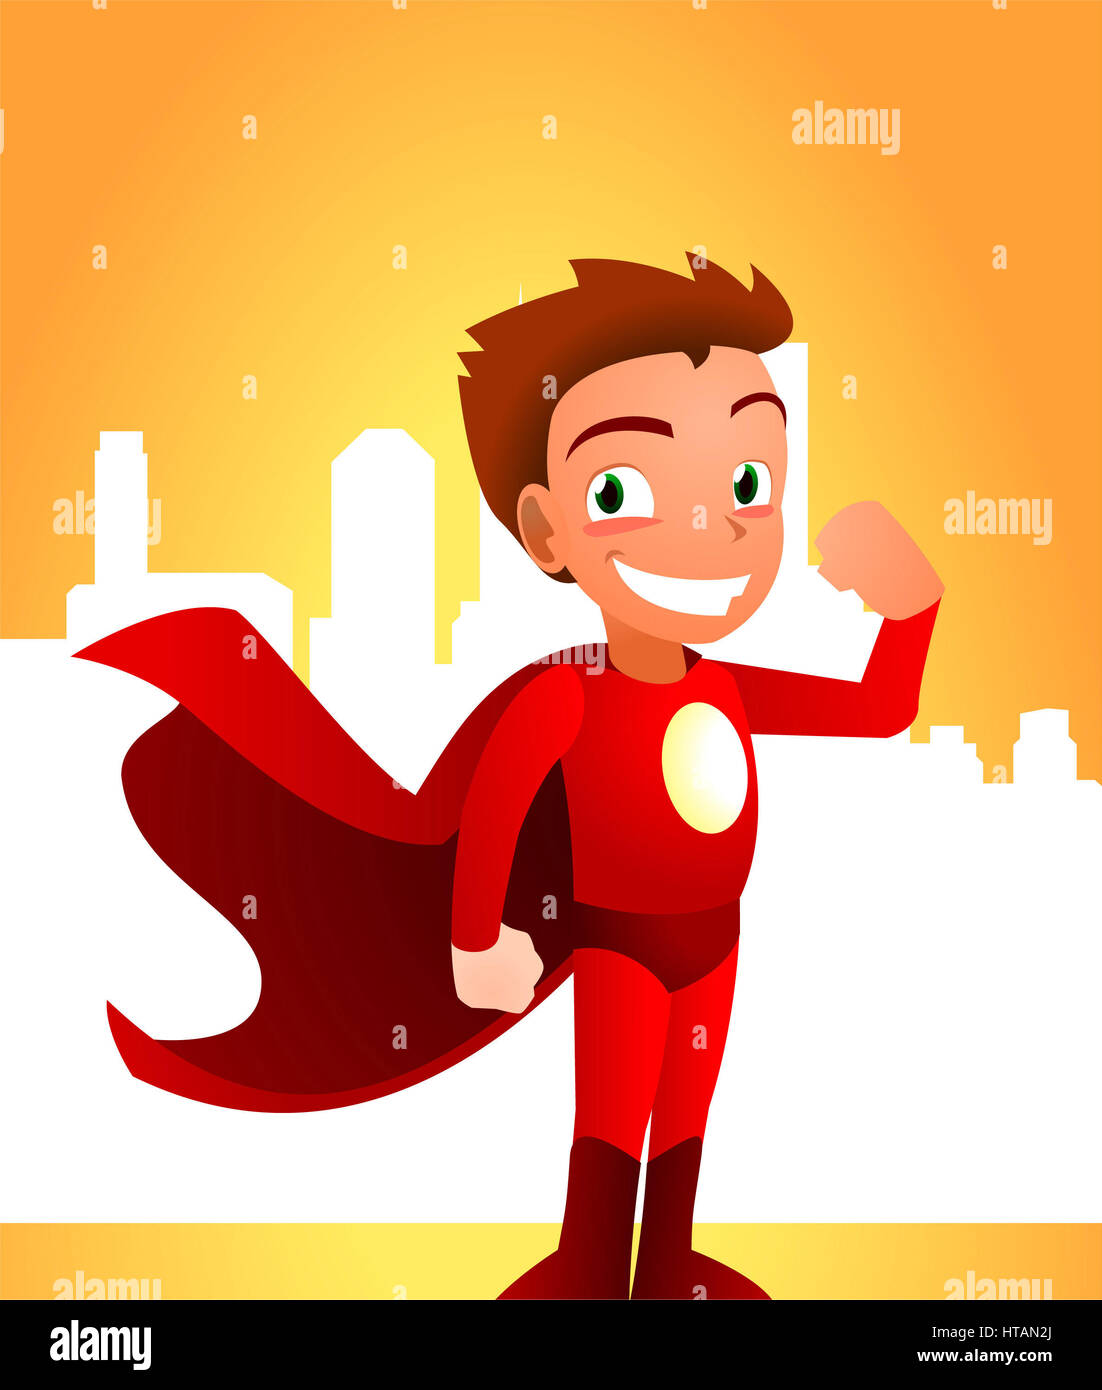 Superhero boy showing his strength, can be used separately from its background. With standing superhero wearing his read hero costume, with city image Stock Photo